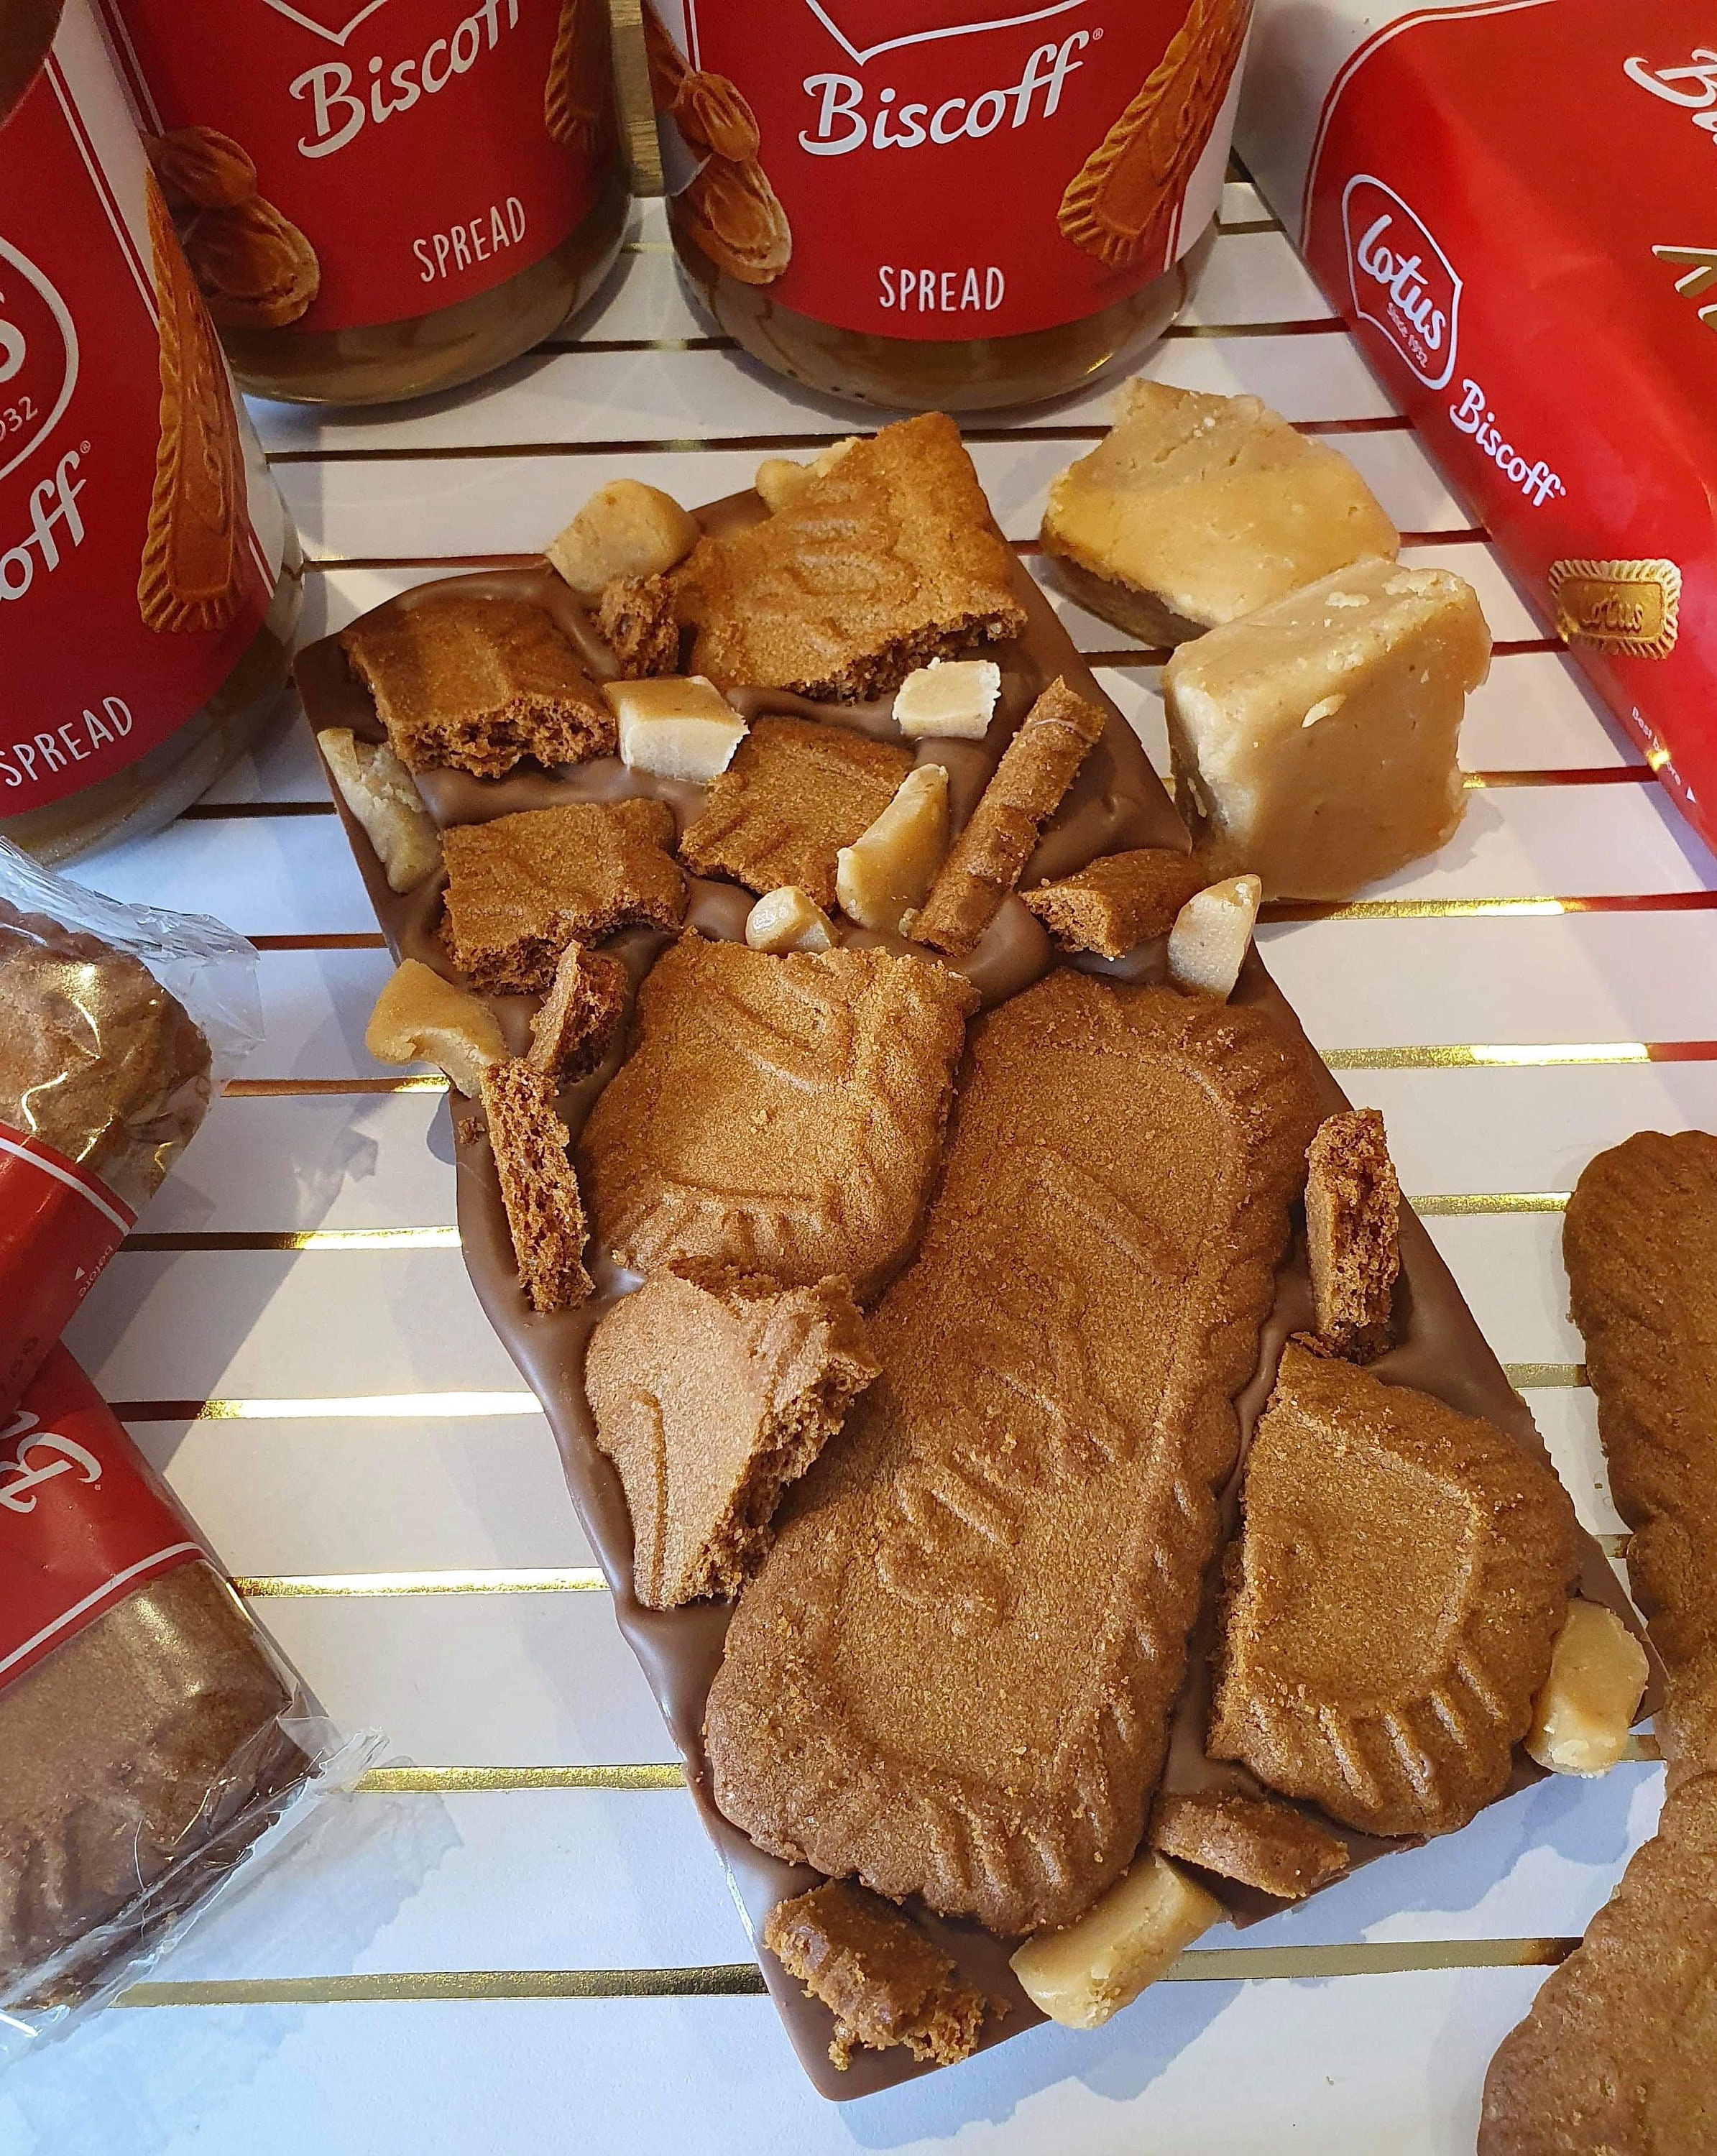 Best Lotus Biscoff Spread Malaysia